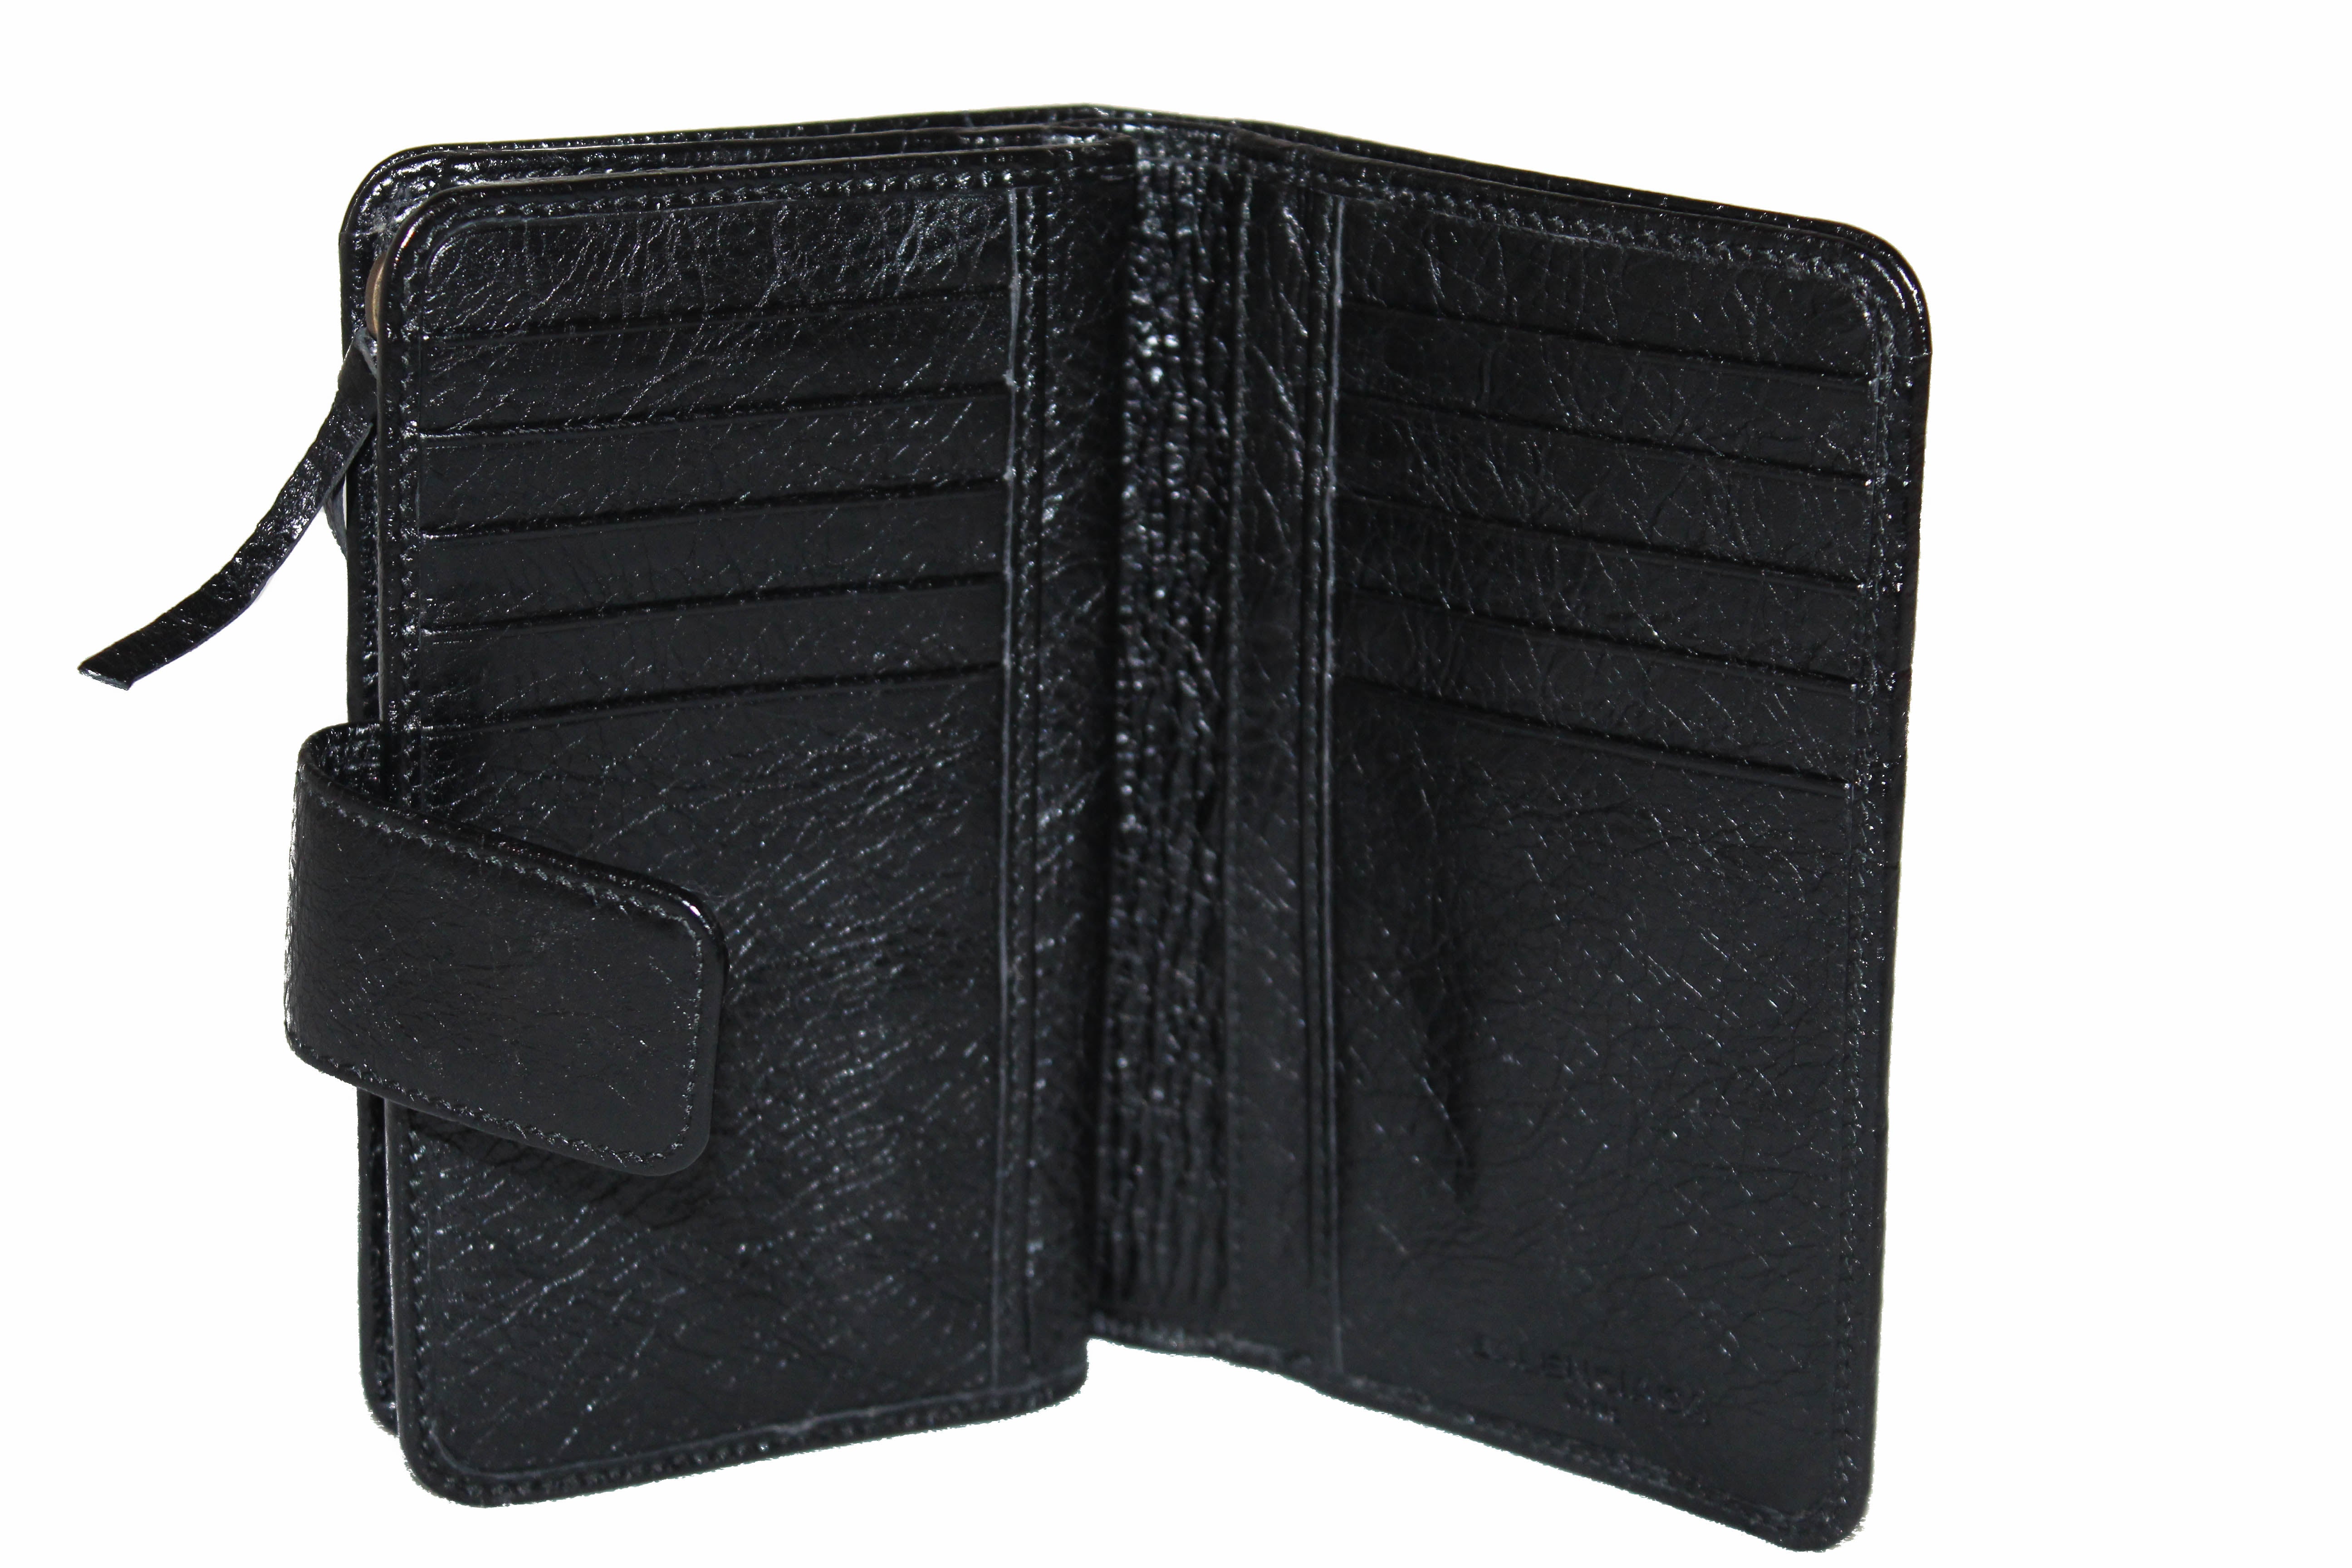 Authentic Balenciaga Black City Lambskin Leather Compact Wallet